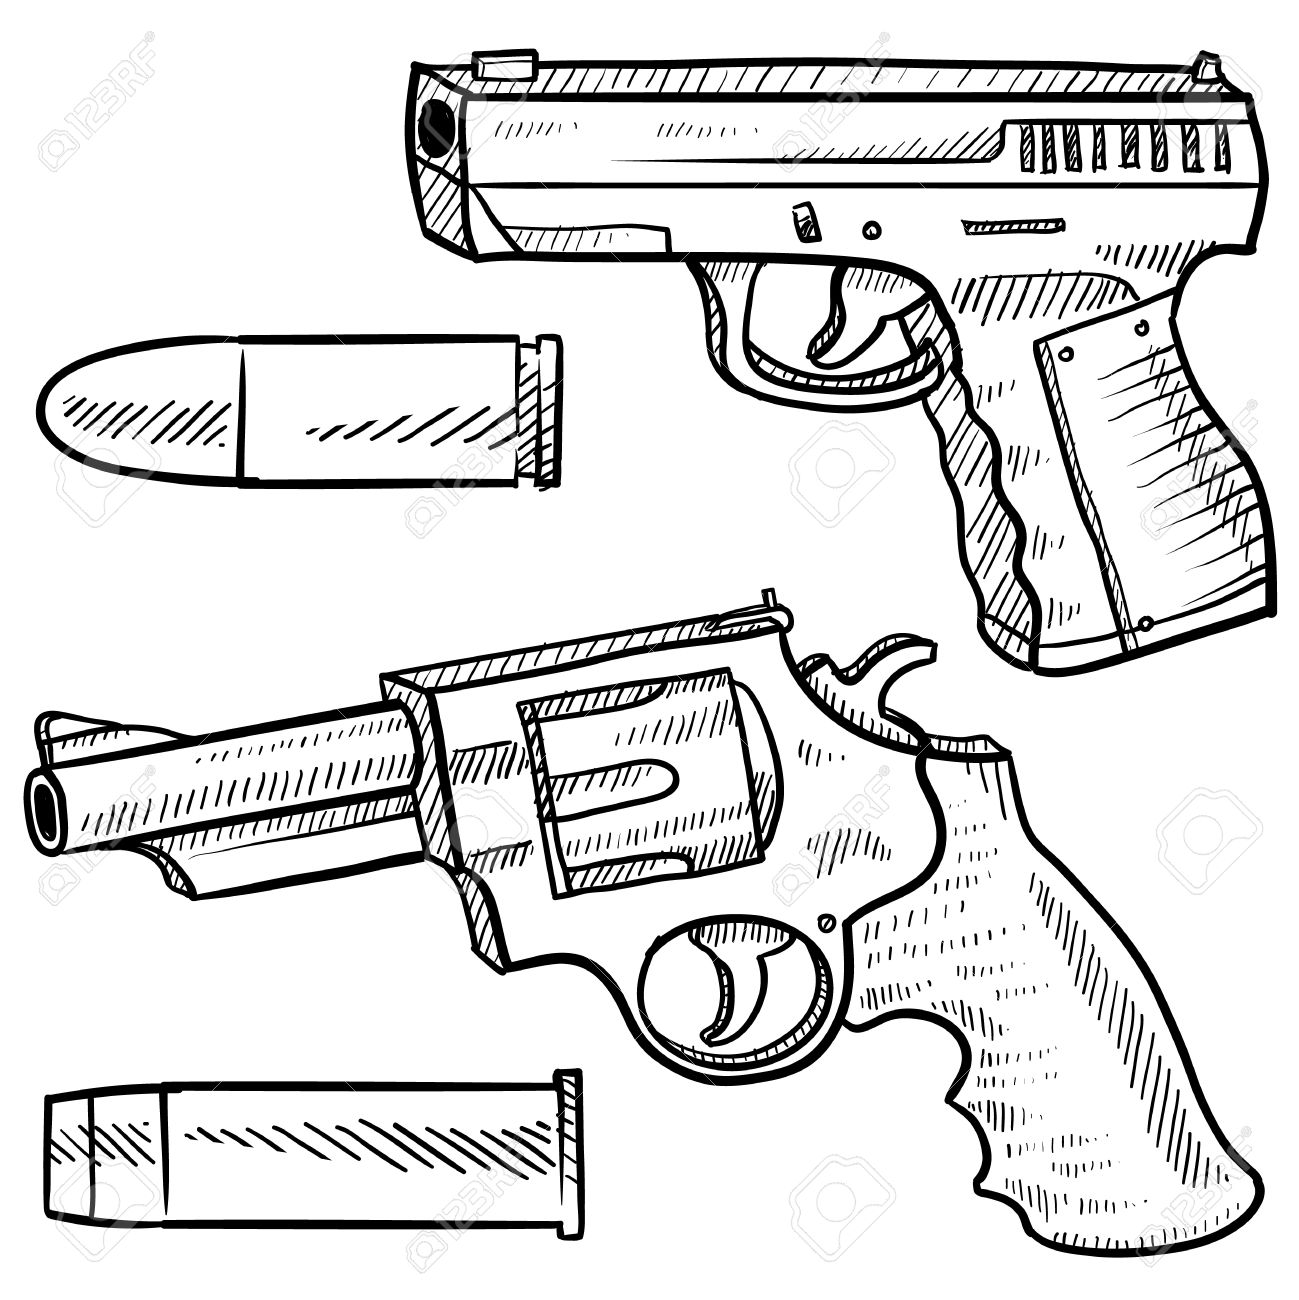 The best free Handgun drawing images. Download from 61 free drawings of